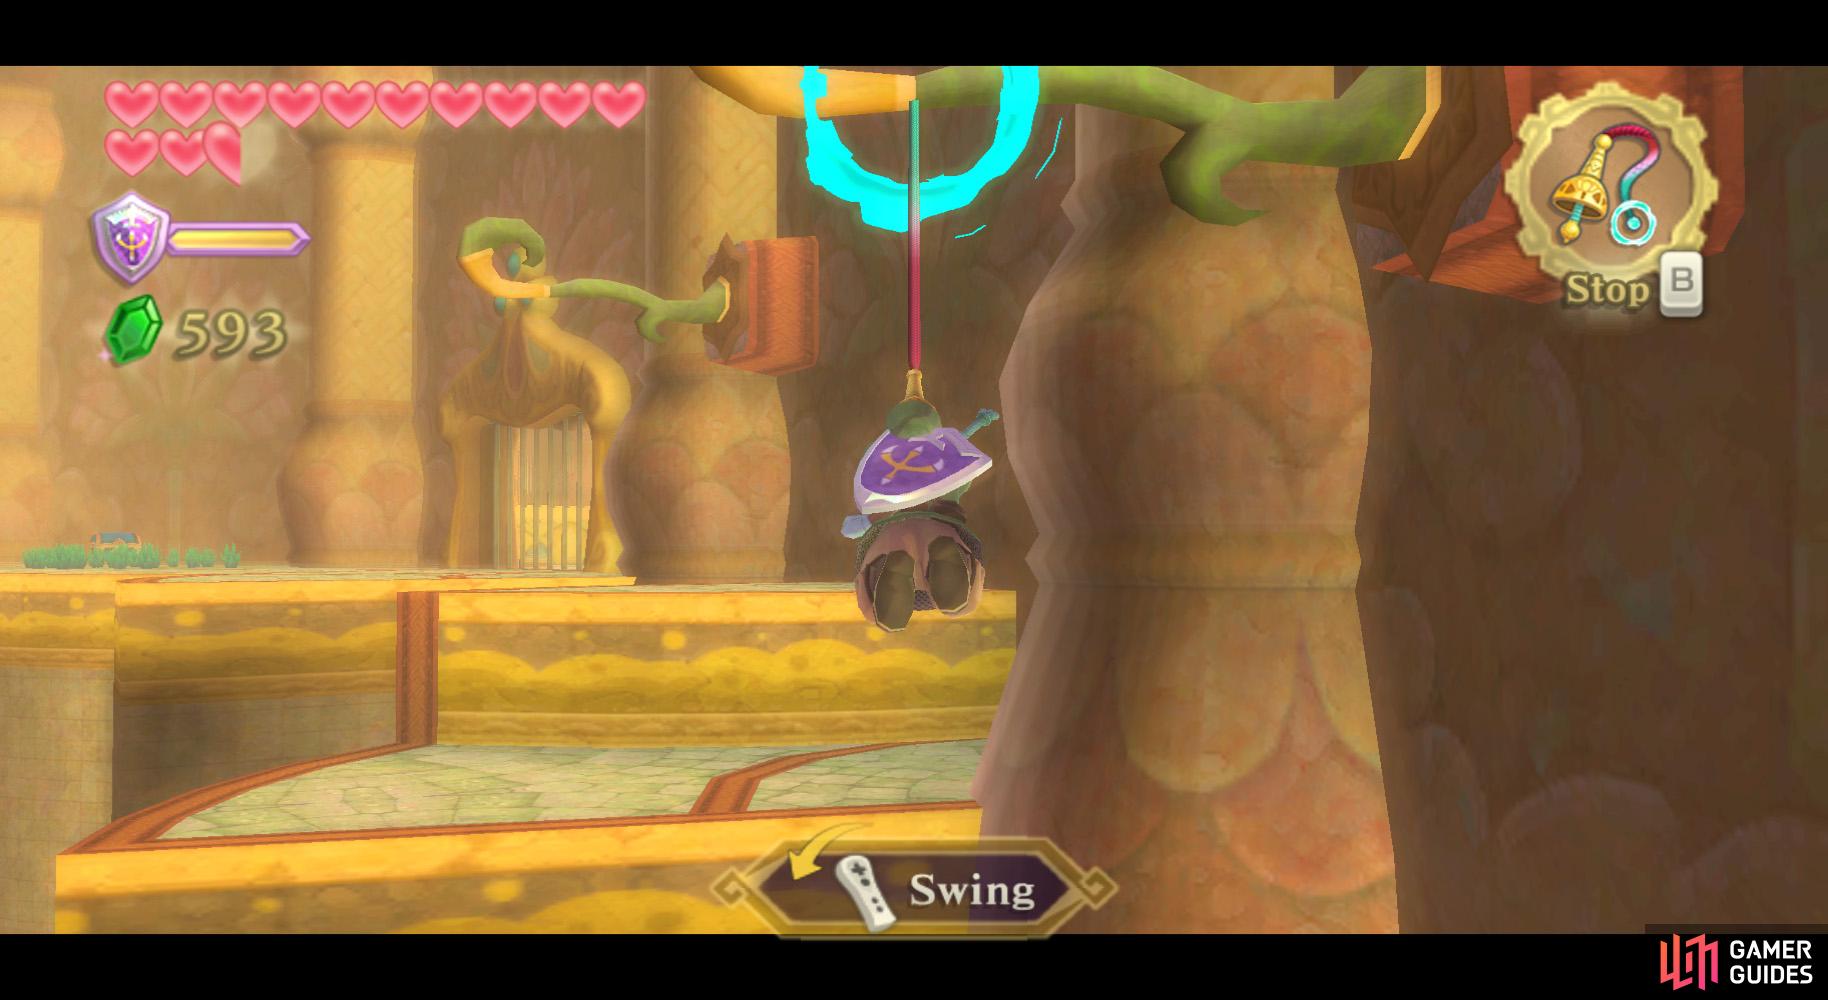 Besides whipping foes and pulling levers, you can use the whip as a make-shift swinging rope.